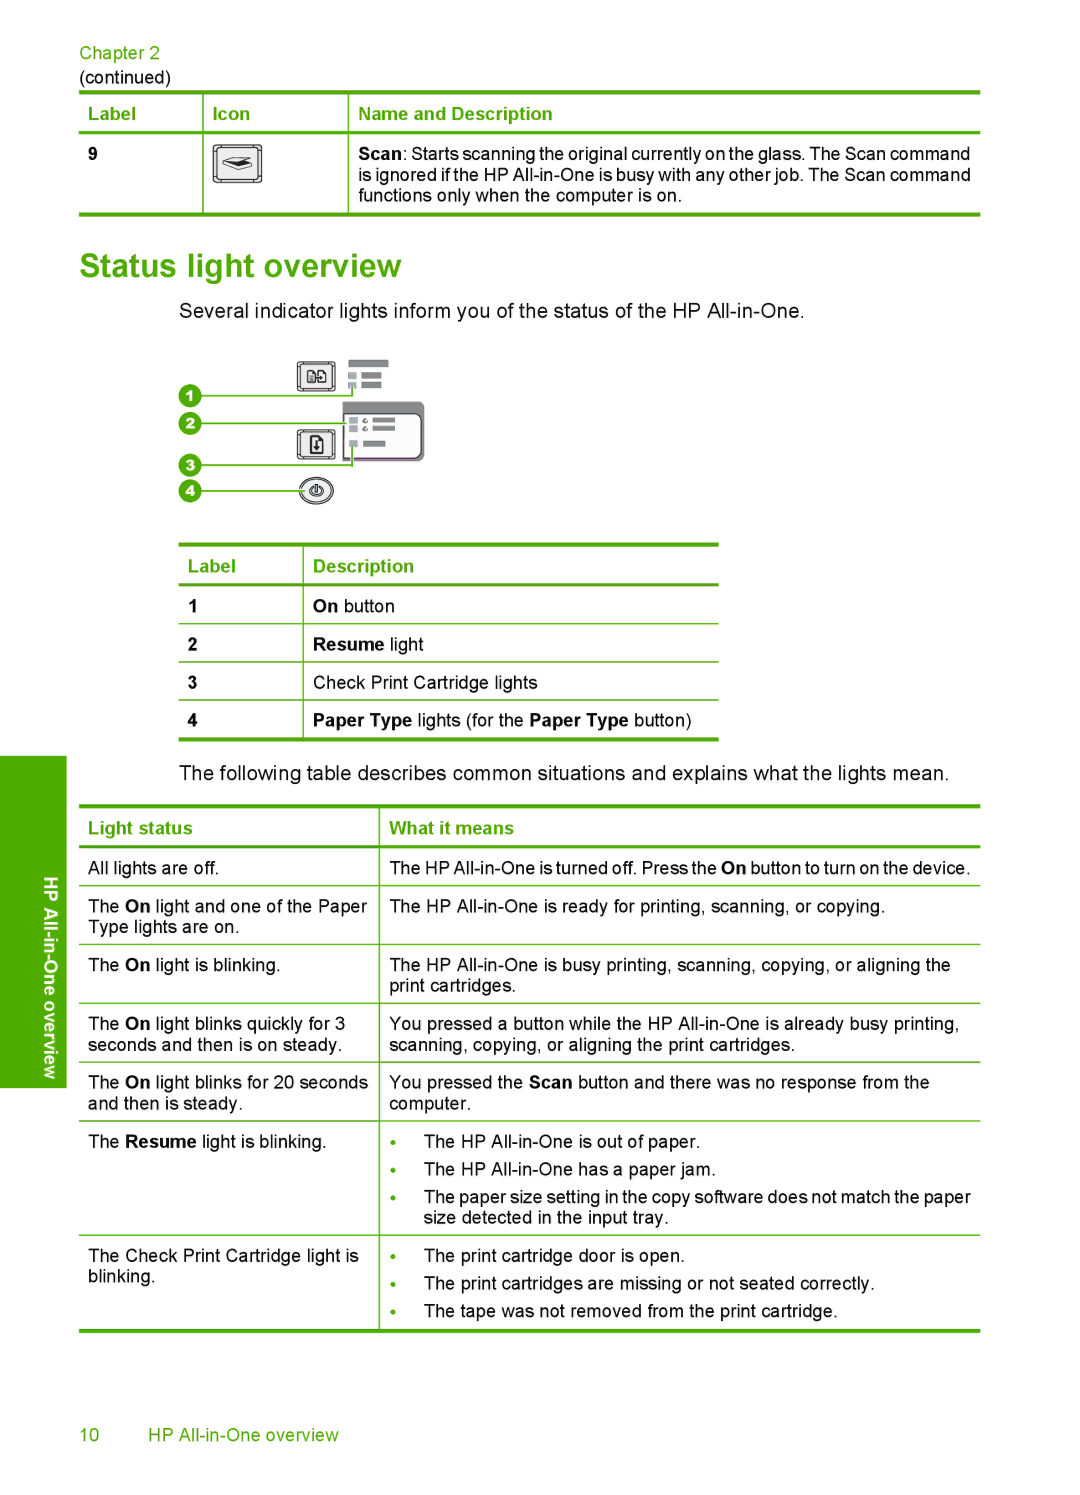 HP F4172, F4140, F4185, F4190, F4180 manual Status light overview, Light status What it means 